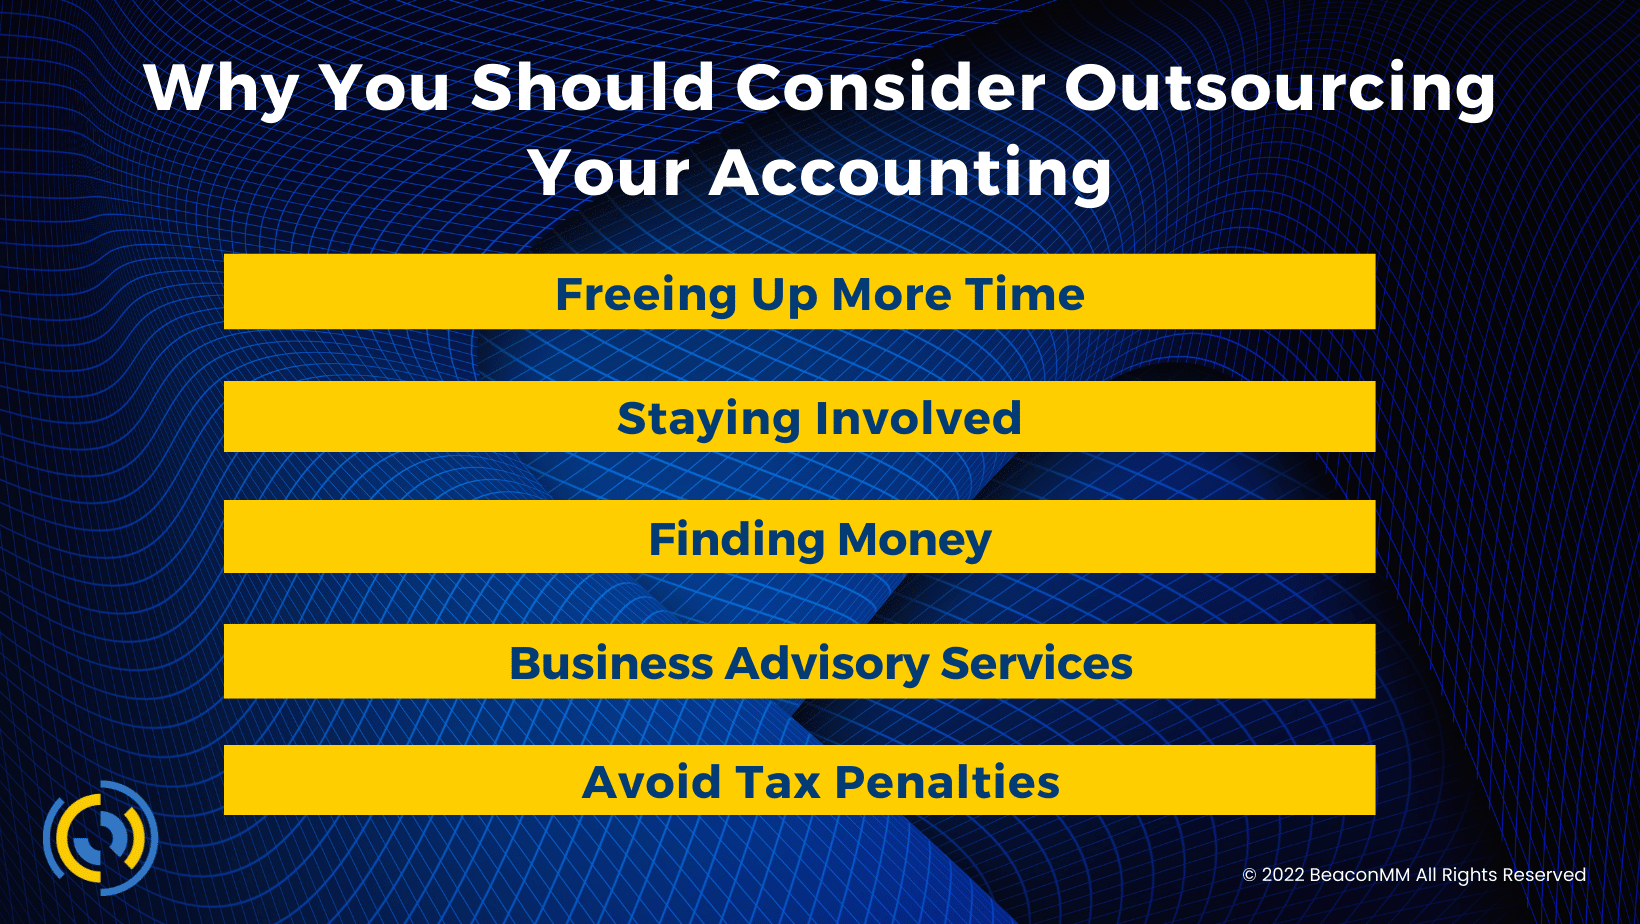 Why You Should Consider Outsourcing Your Accounting infographic